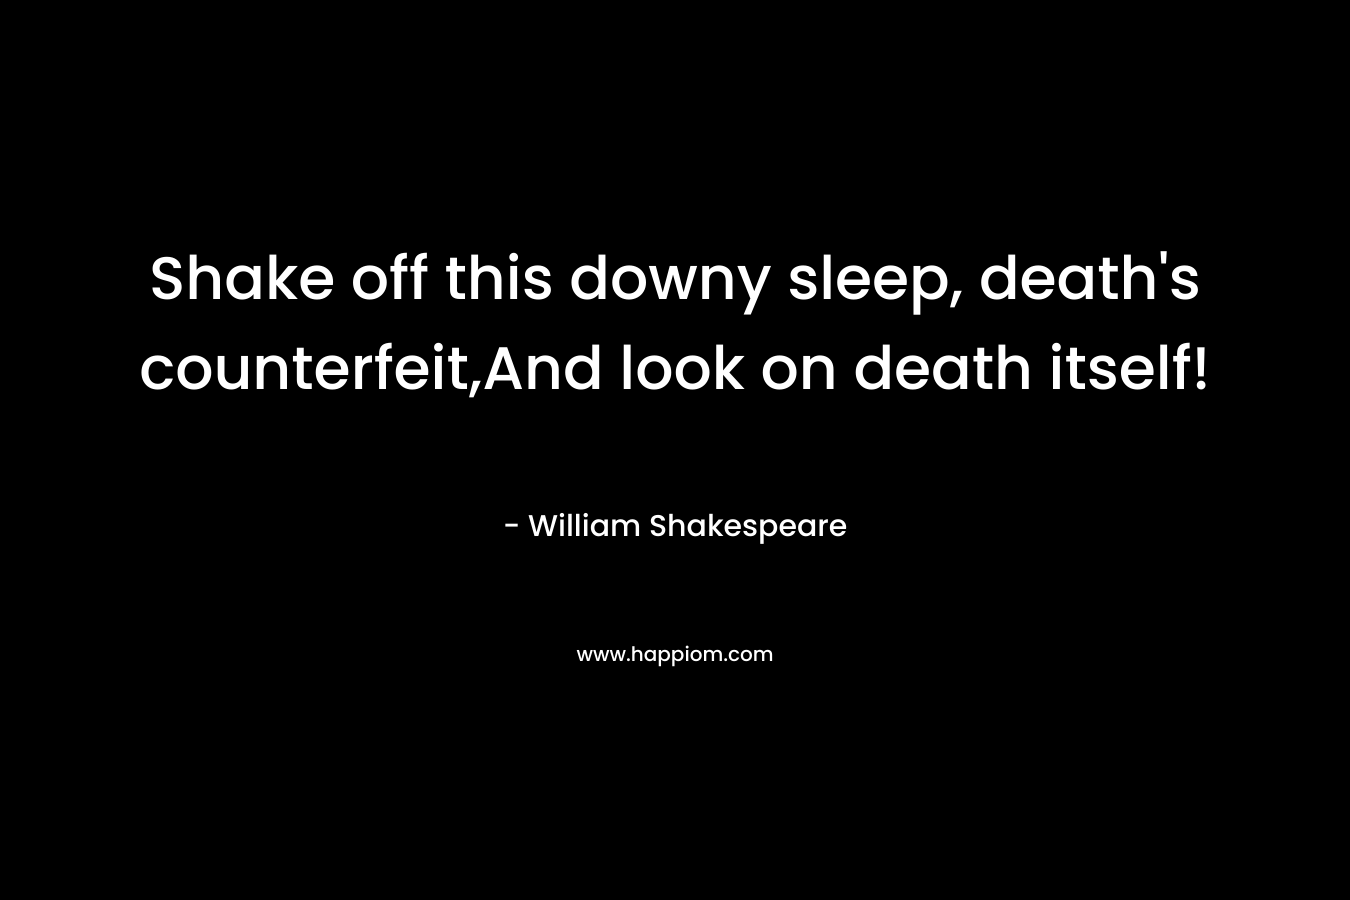 Shake off this downy sleep, death’s counterfeit,And look on death itself! – William Shakespeare